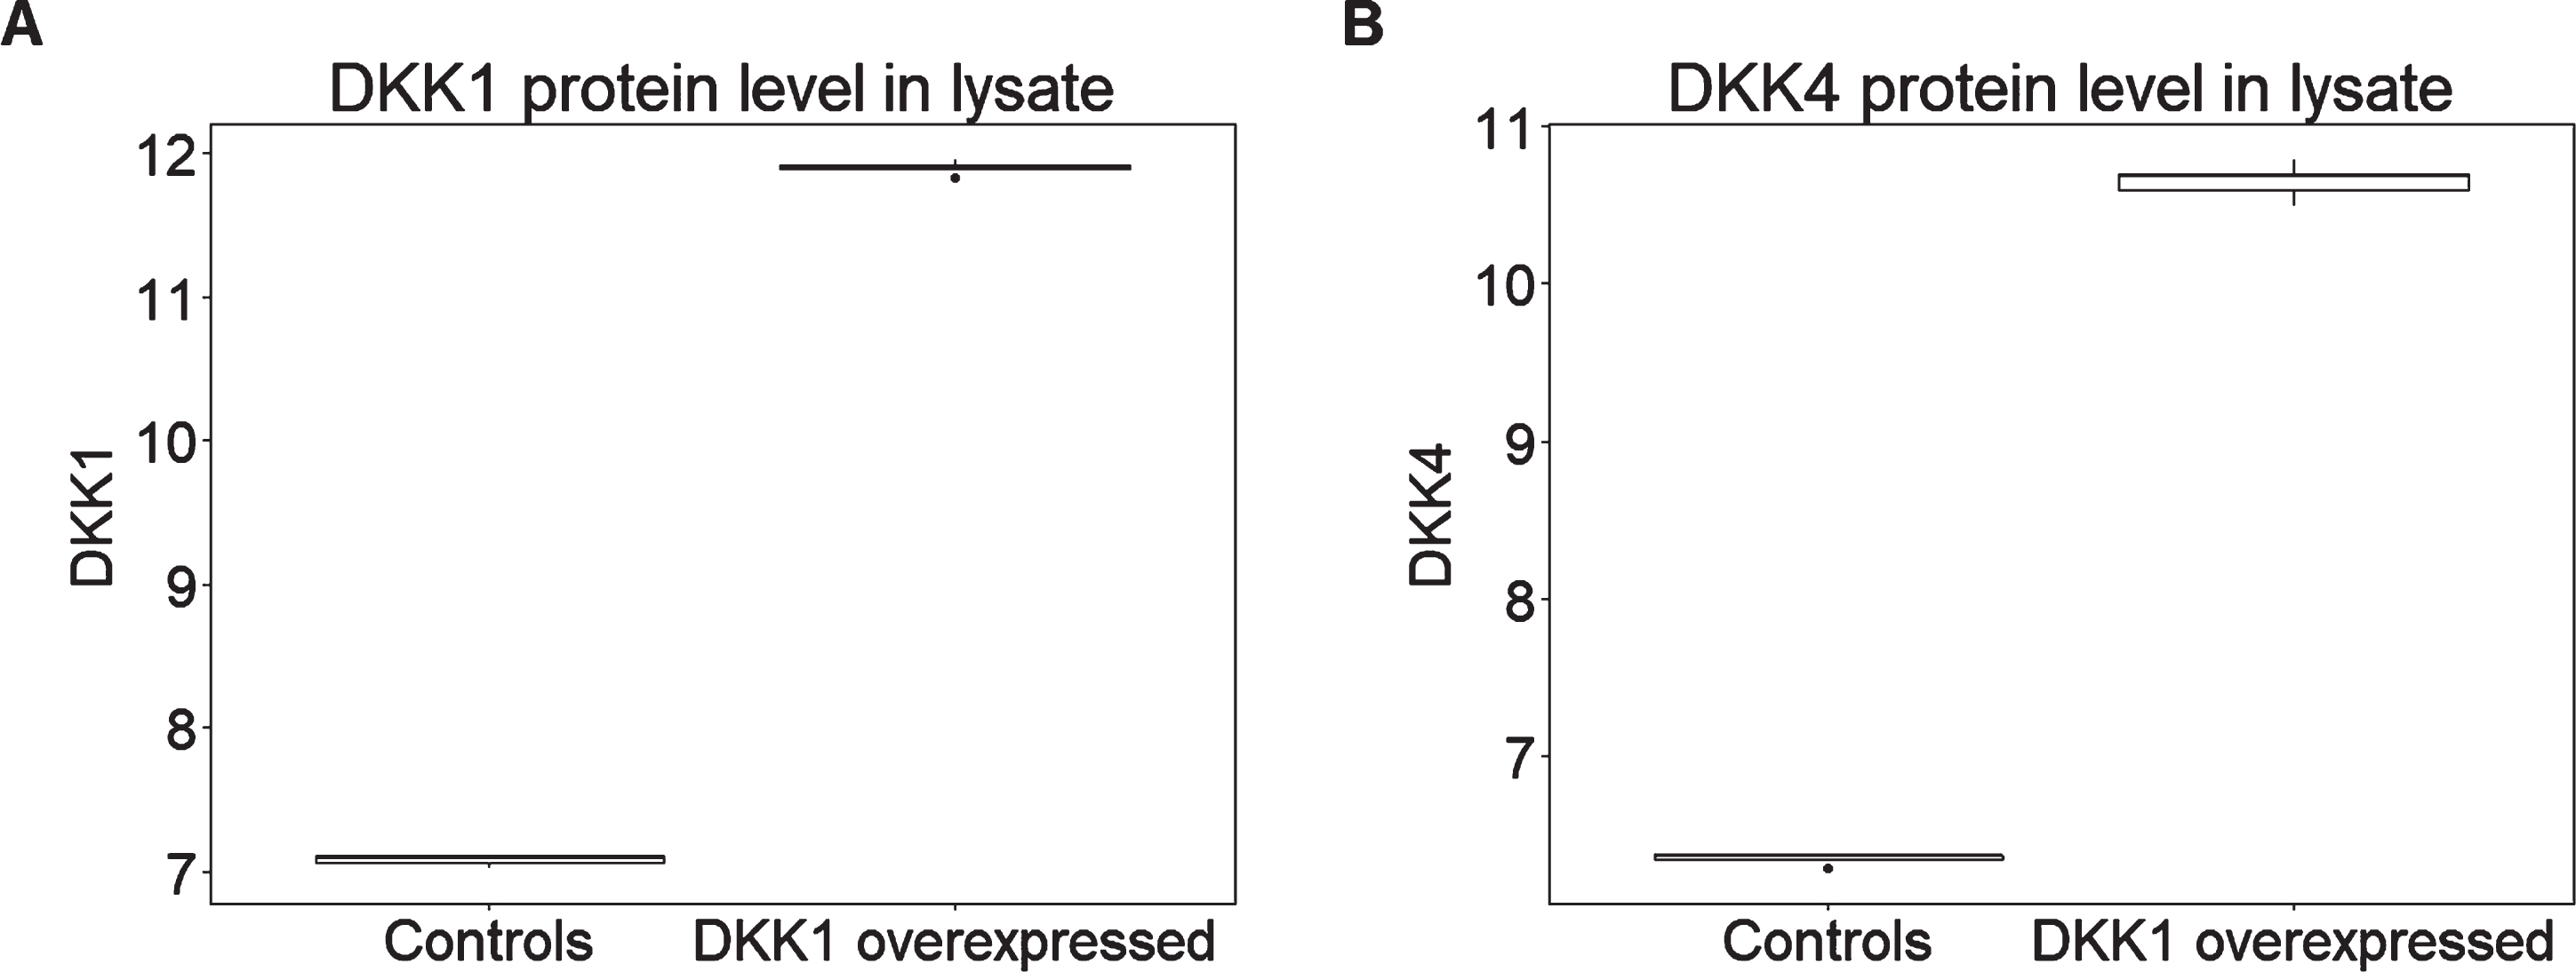 DKK1 overexpression leads to higher levels of (A) DKK1 and (B) DKK4 expression in HEK293A cell lysate (n = 5 per condition). Y axis represents the log transformed of proteins expression abundance measured by Somascan assay.